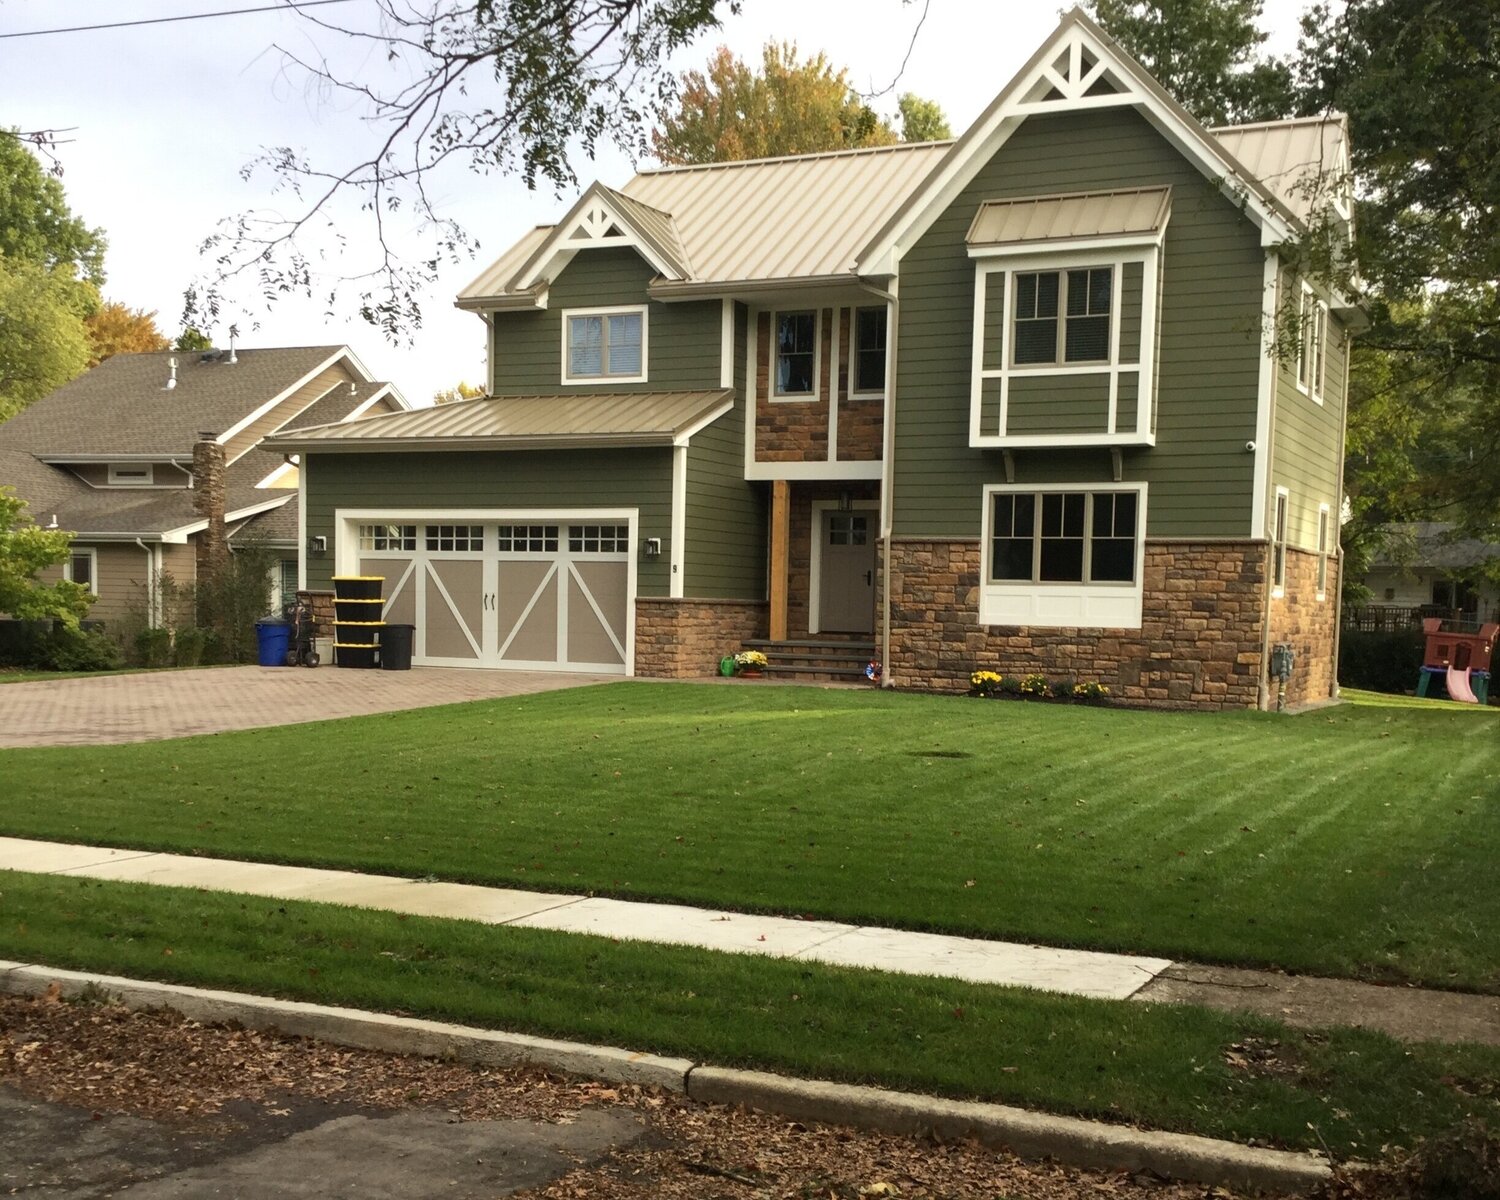 Professional Landscape Contractor Serving New York New Jersey Connecticut Grasskeepers Landscaping Construction Inc